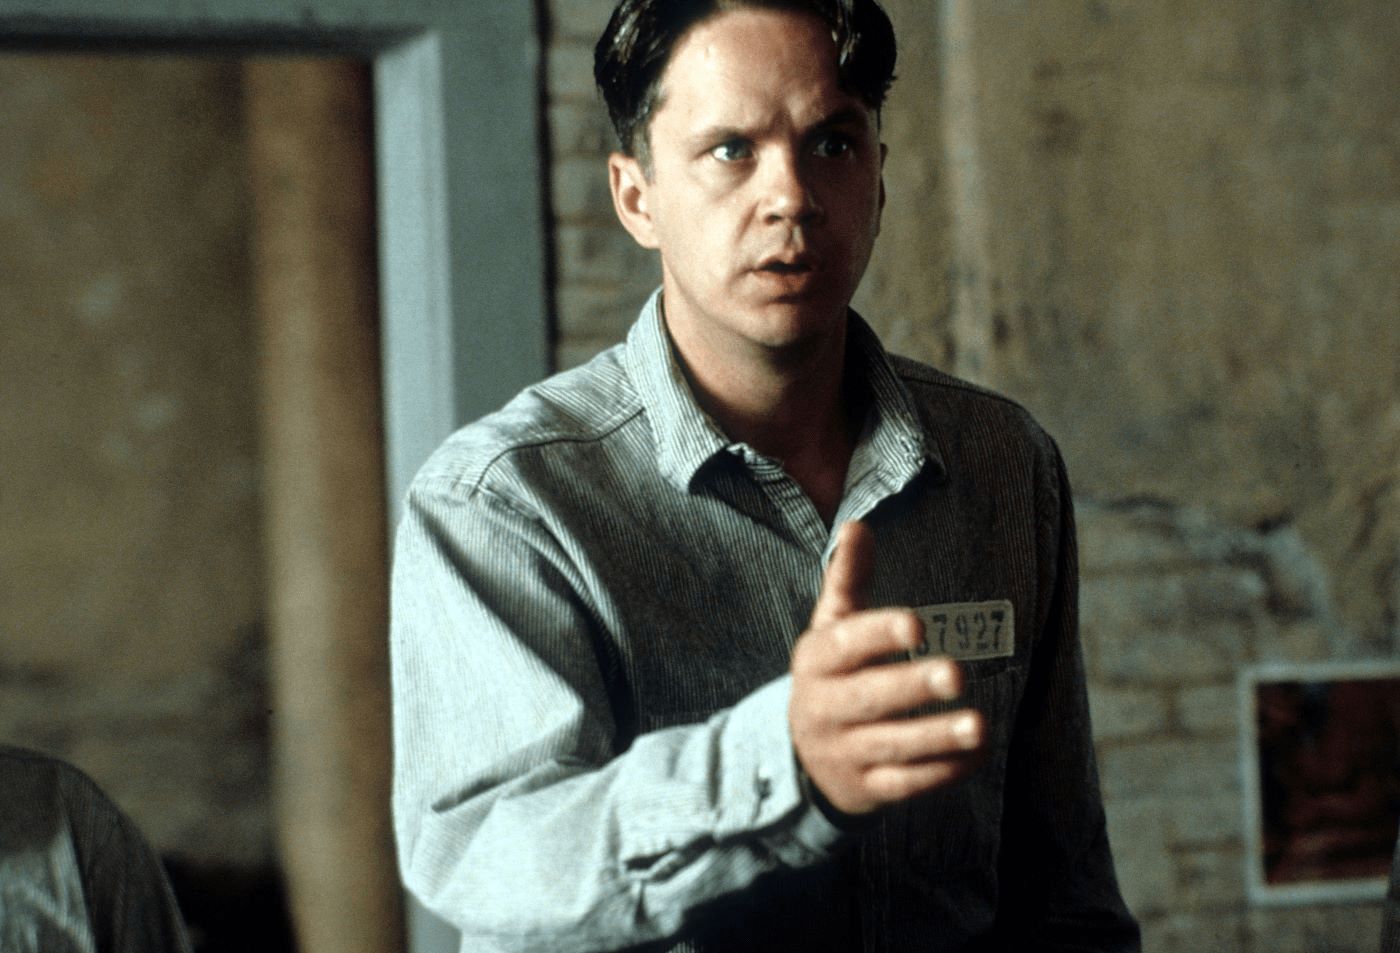 Is The Shawshank Redemption Fact or Fiction?